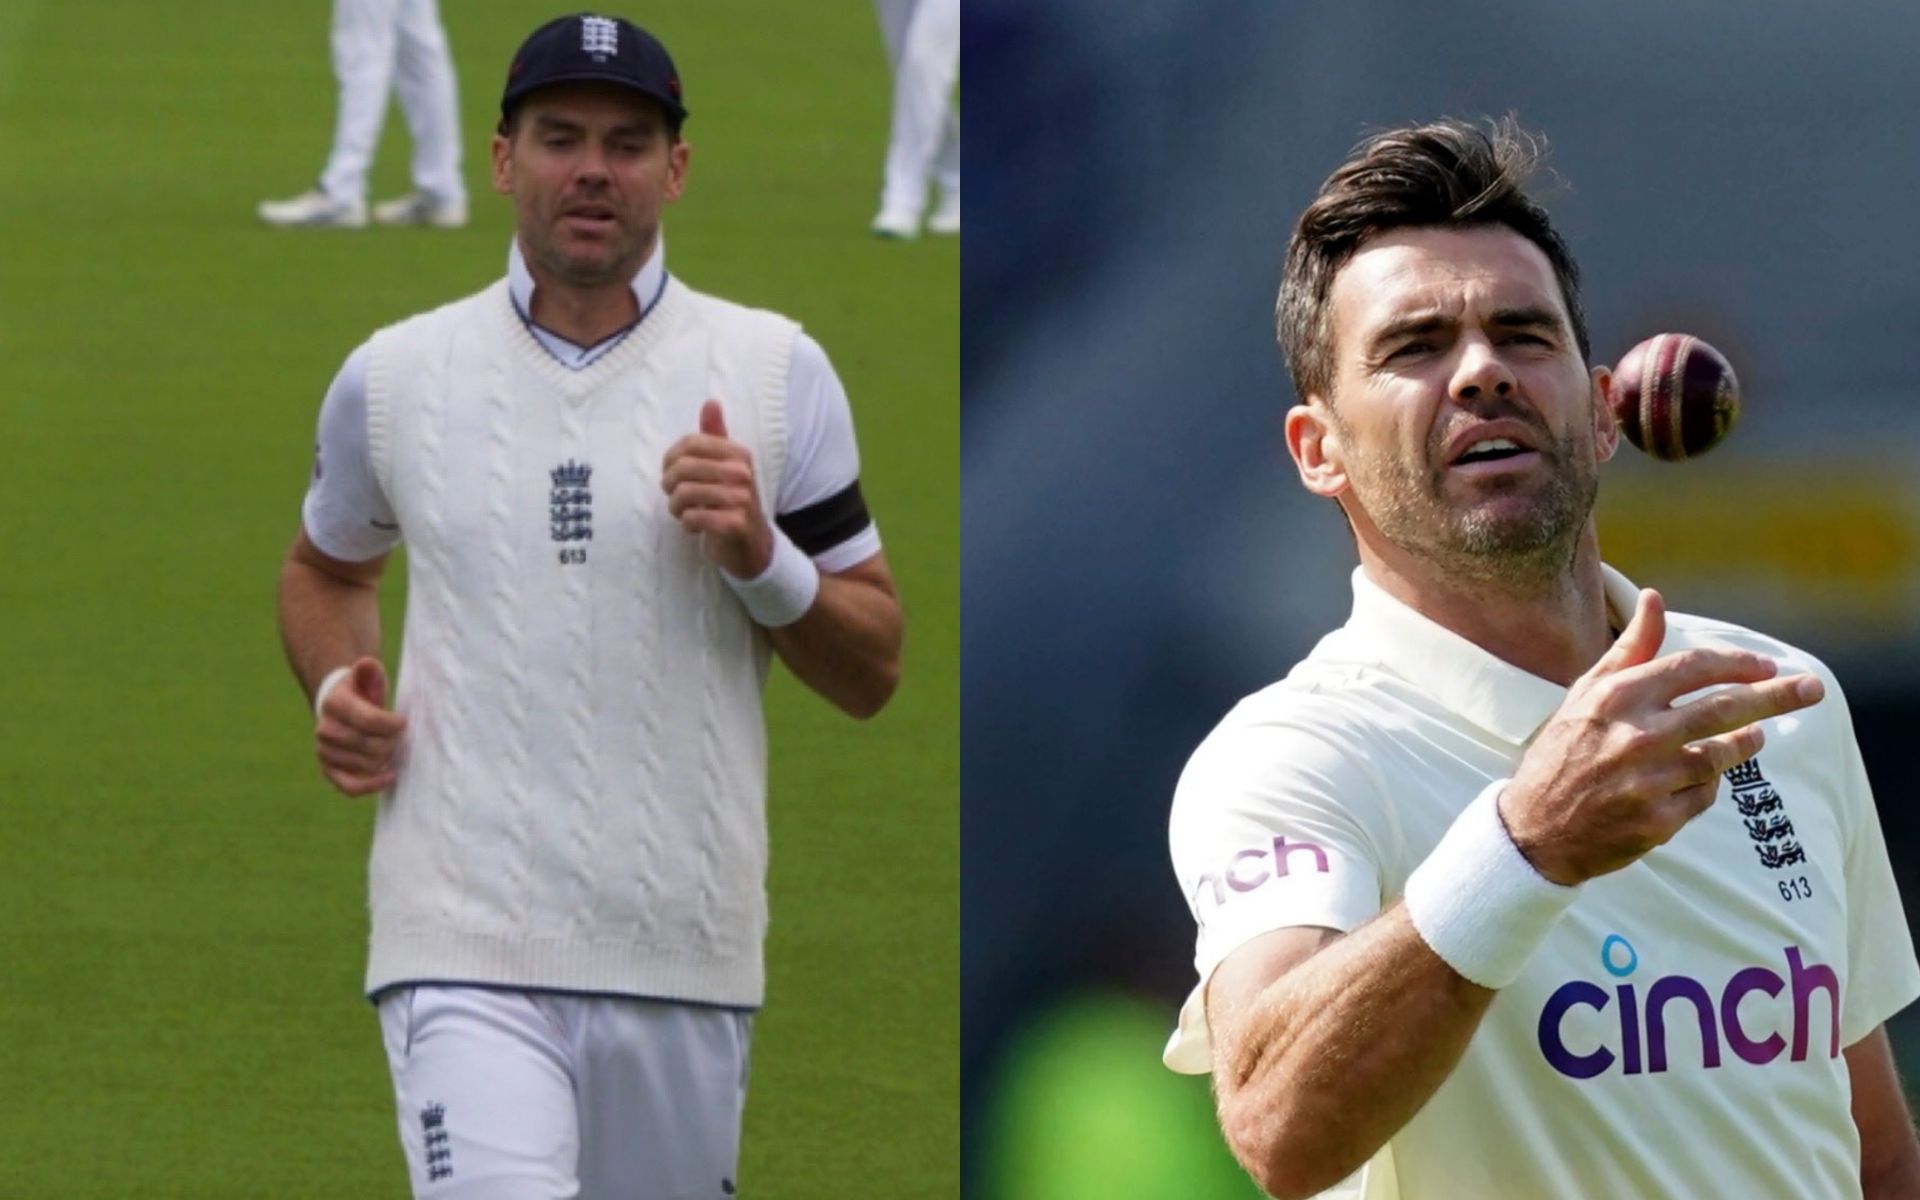 James Anderson Set To Retire From International Cricket After ENG vs SL Test Series: Reports